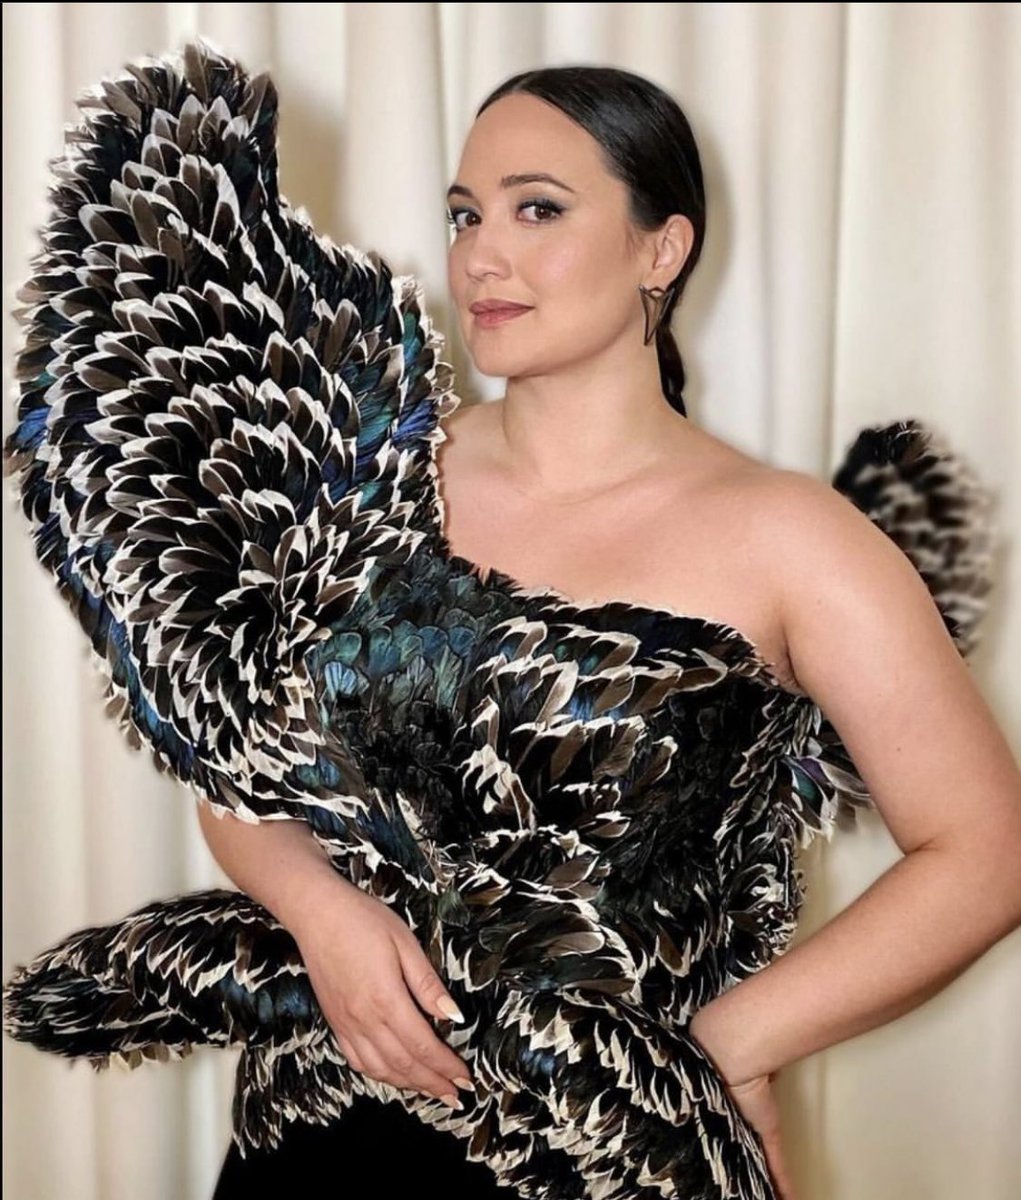 Lily gladstone in the Migration dress by indigenous designer Jontay Kahm at the SBIFF